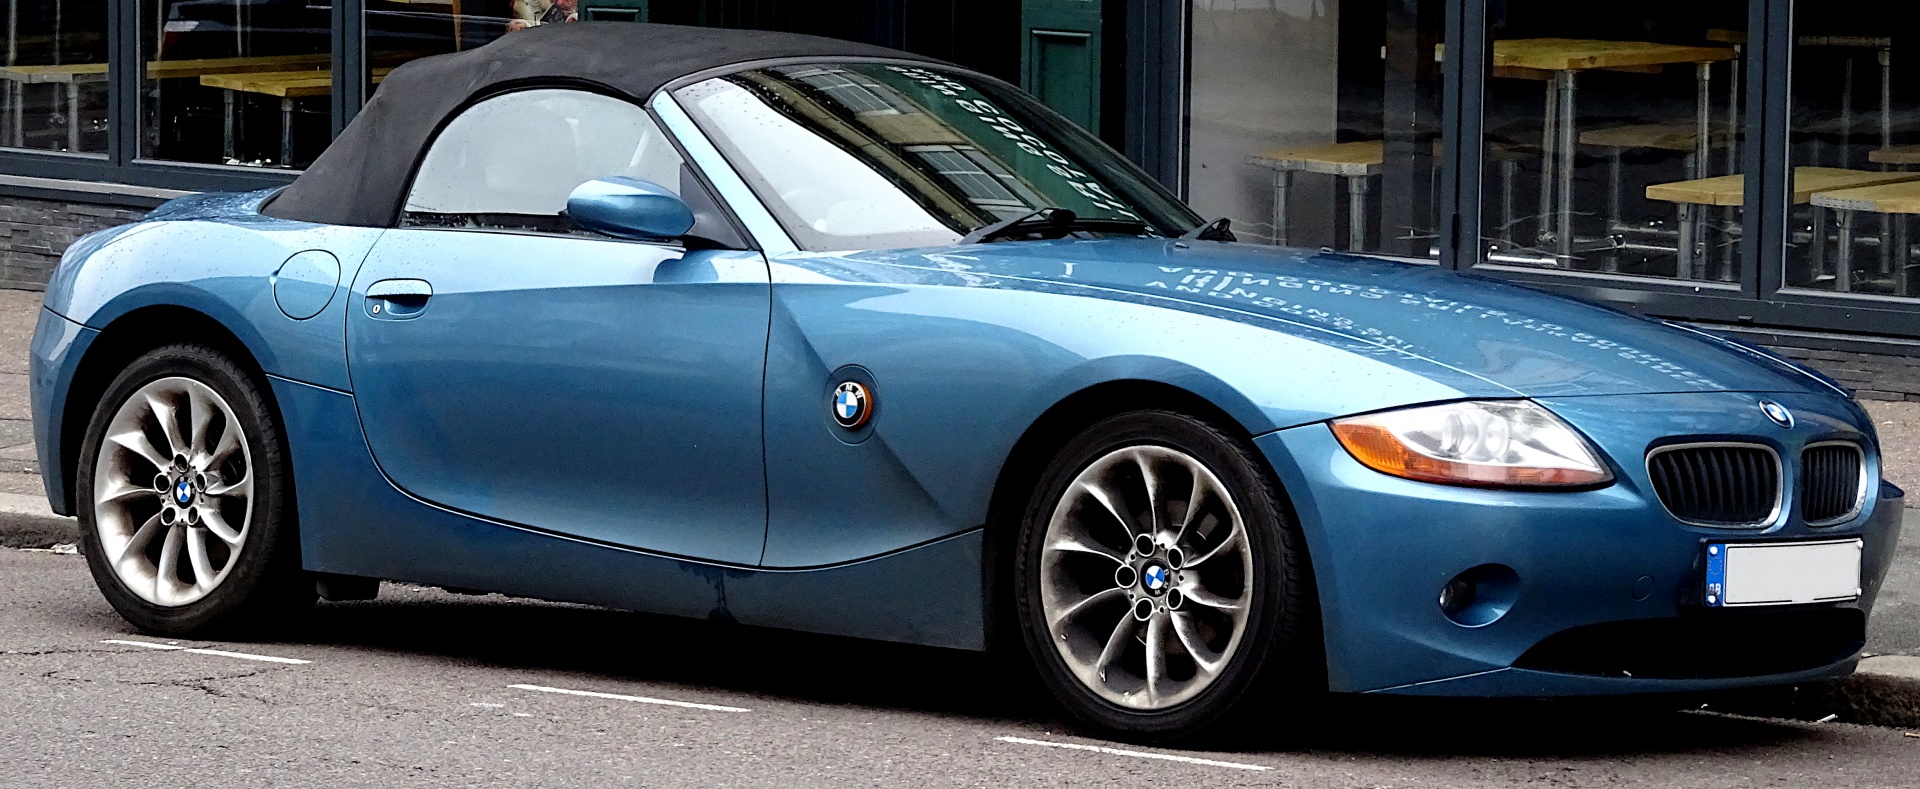 Convertible BMW Sports Car Free Stock Photo - Public Domain Pictures